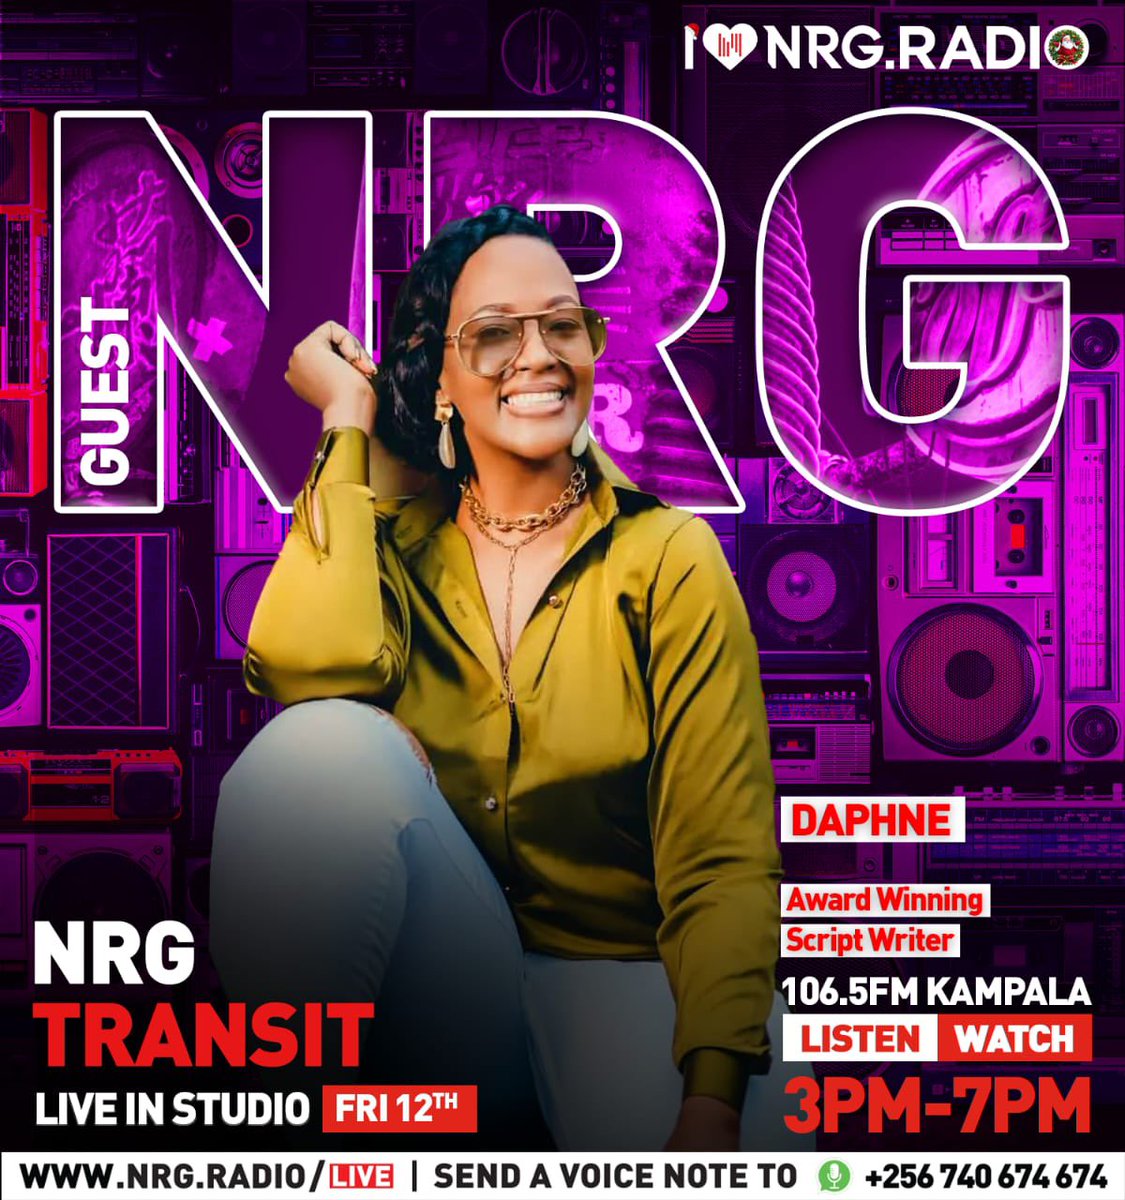 Hey Friends of Munah, the award-winning scriptwriter Daphne, @BeautifulMukiga, will be featured on @NRGRadioUganda's #NRGTransit from 3 pm to 7 pm. 

Tune in to listen/watch and get ready to ask her your questions. 😍 #BordersPremiere